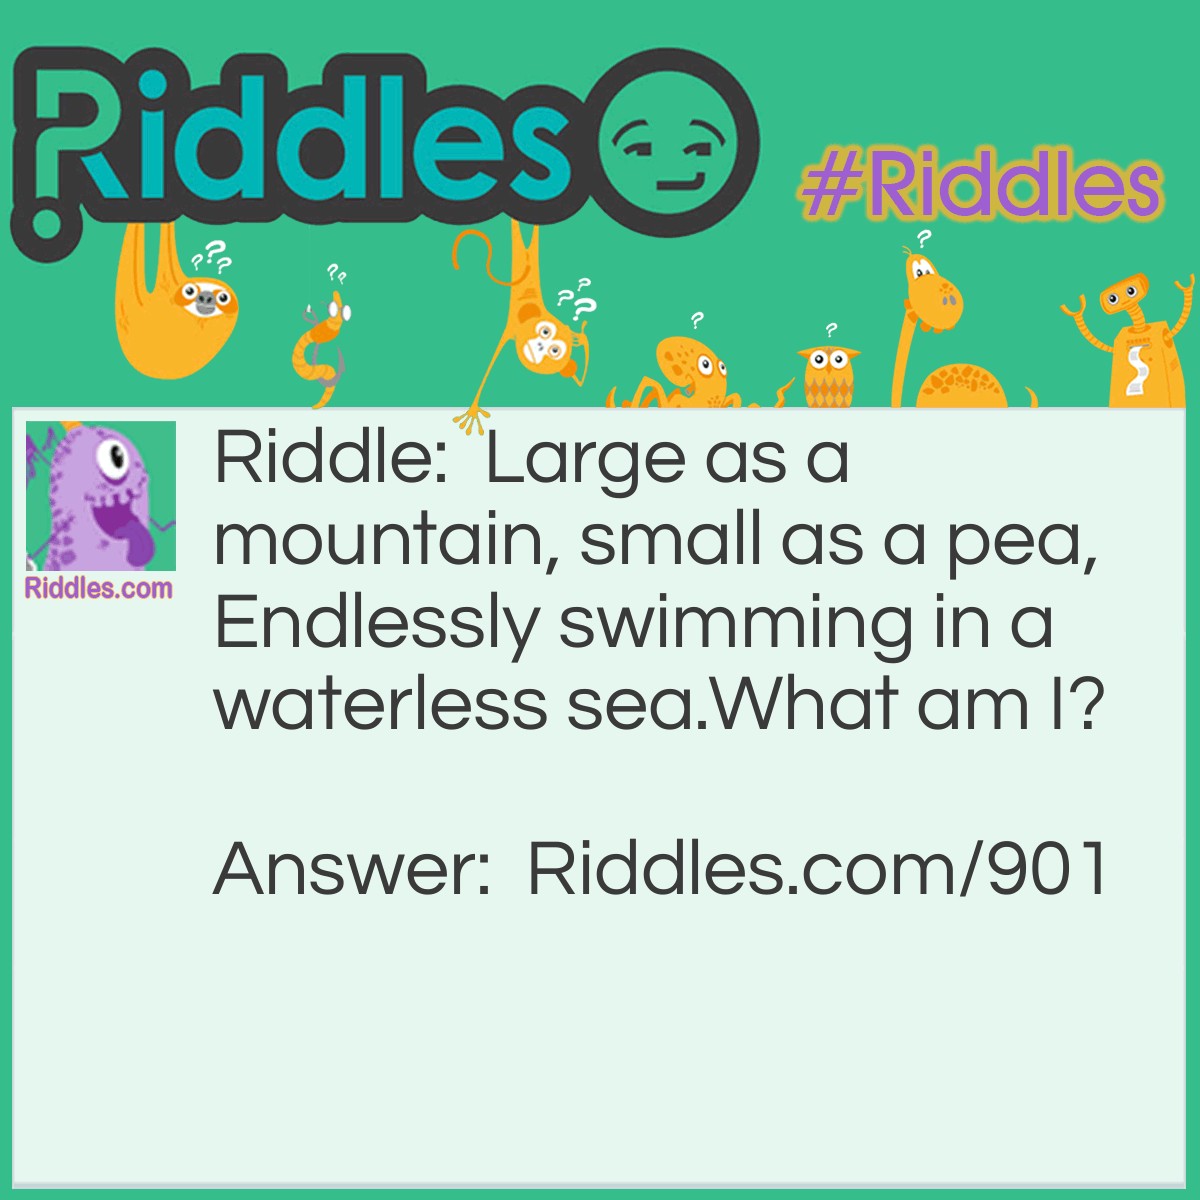 Riddle: Large as a mountain, small as a pea, Endlessly swimming in a waterless sea.
What am I? Answer: Asteroids!